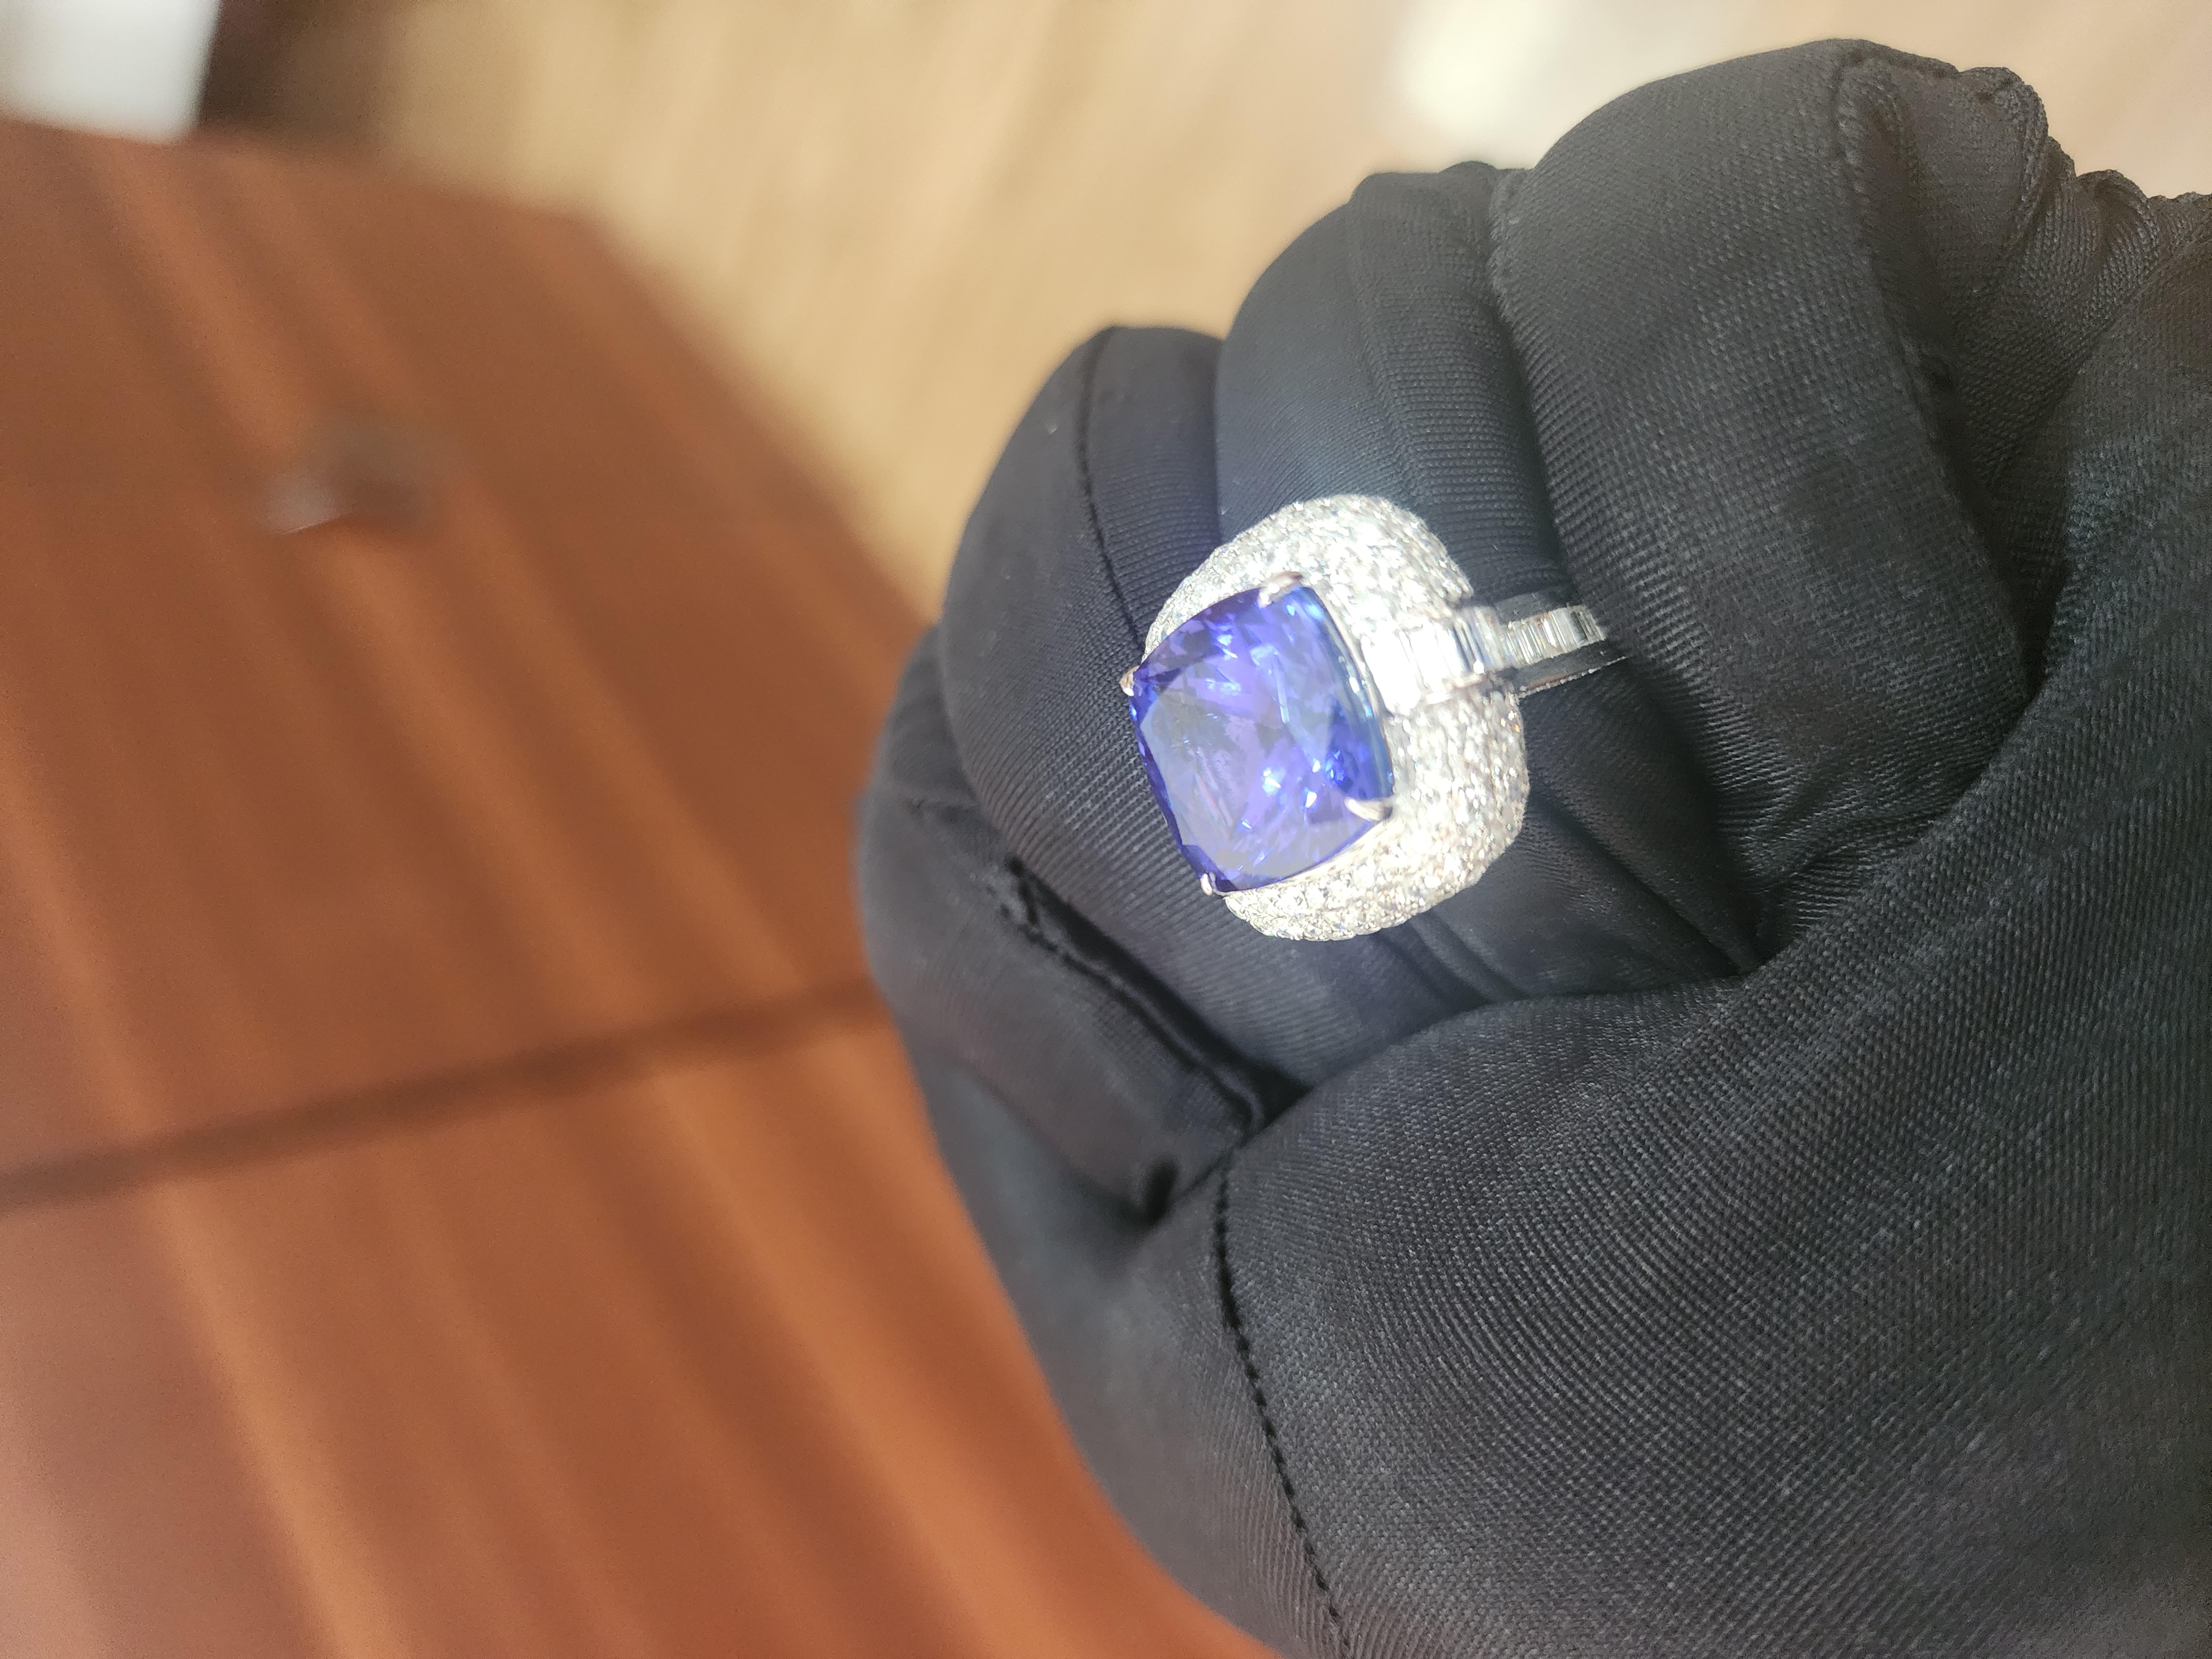 This extraordinary Huge 13.27 carat tanzanite is a true gemstone that is highly treasured. It is surrounded by a total of 3.4 carats of shimmering white diamonds, which adds to the overall beauty and elegance of the piece. The oval-cut gem exhibits